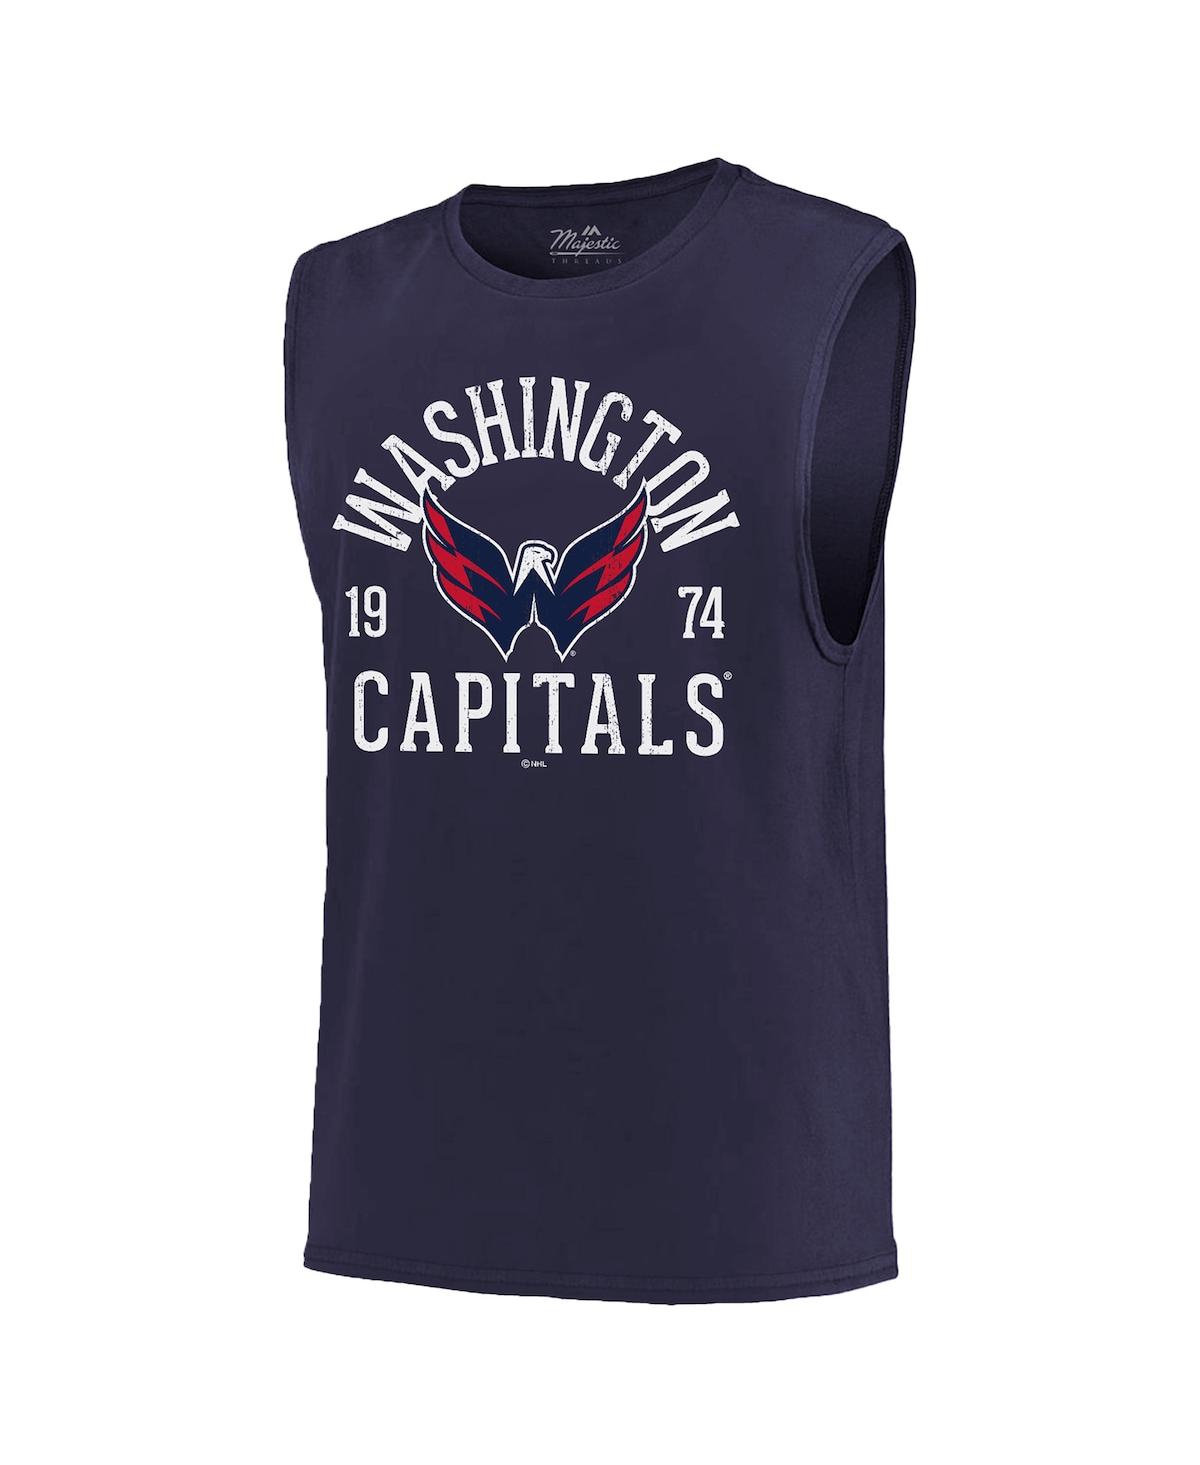 Shop Majestic Men's  Threads Navy Washington Capitals Softhand Muscle Tank Top